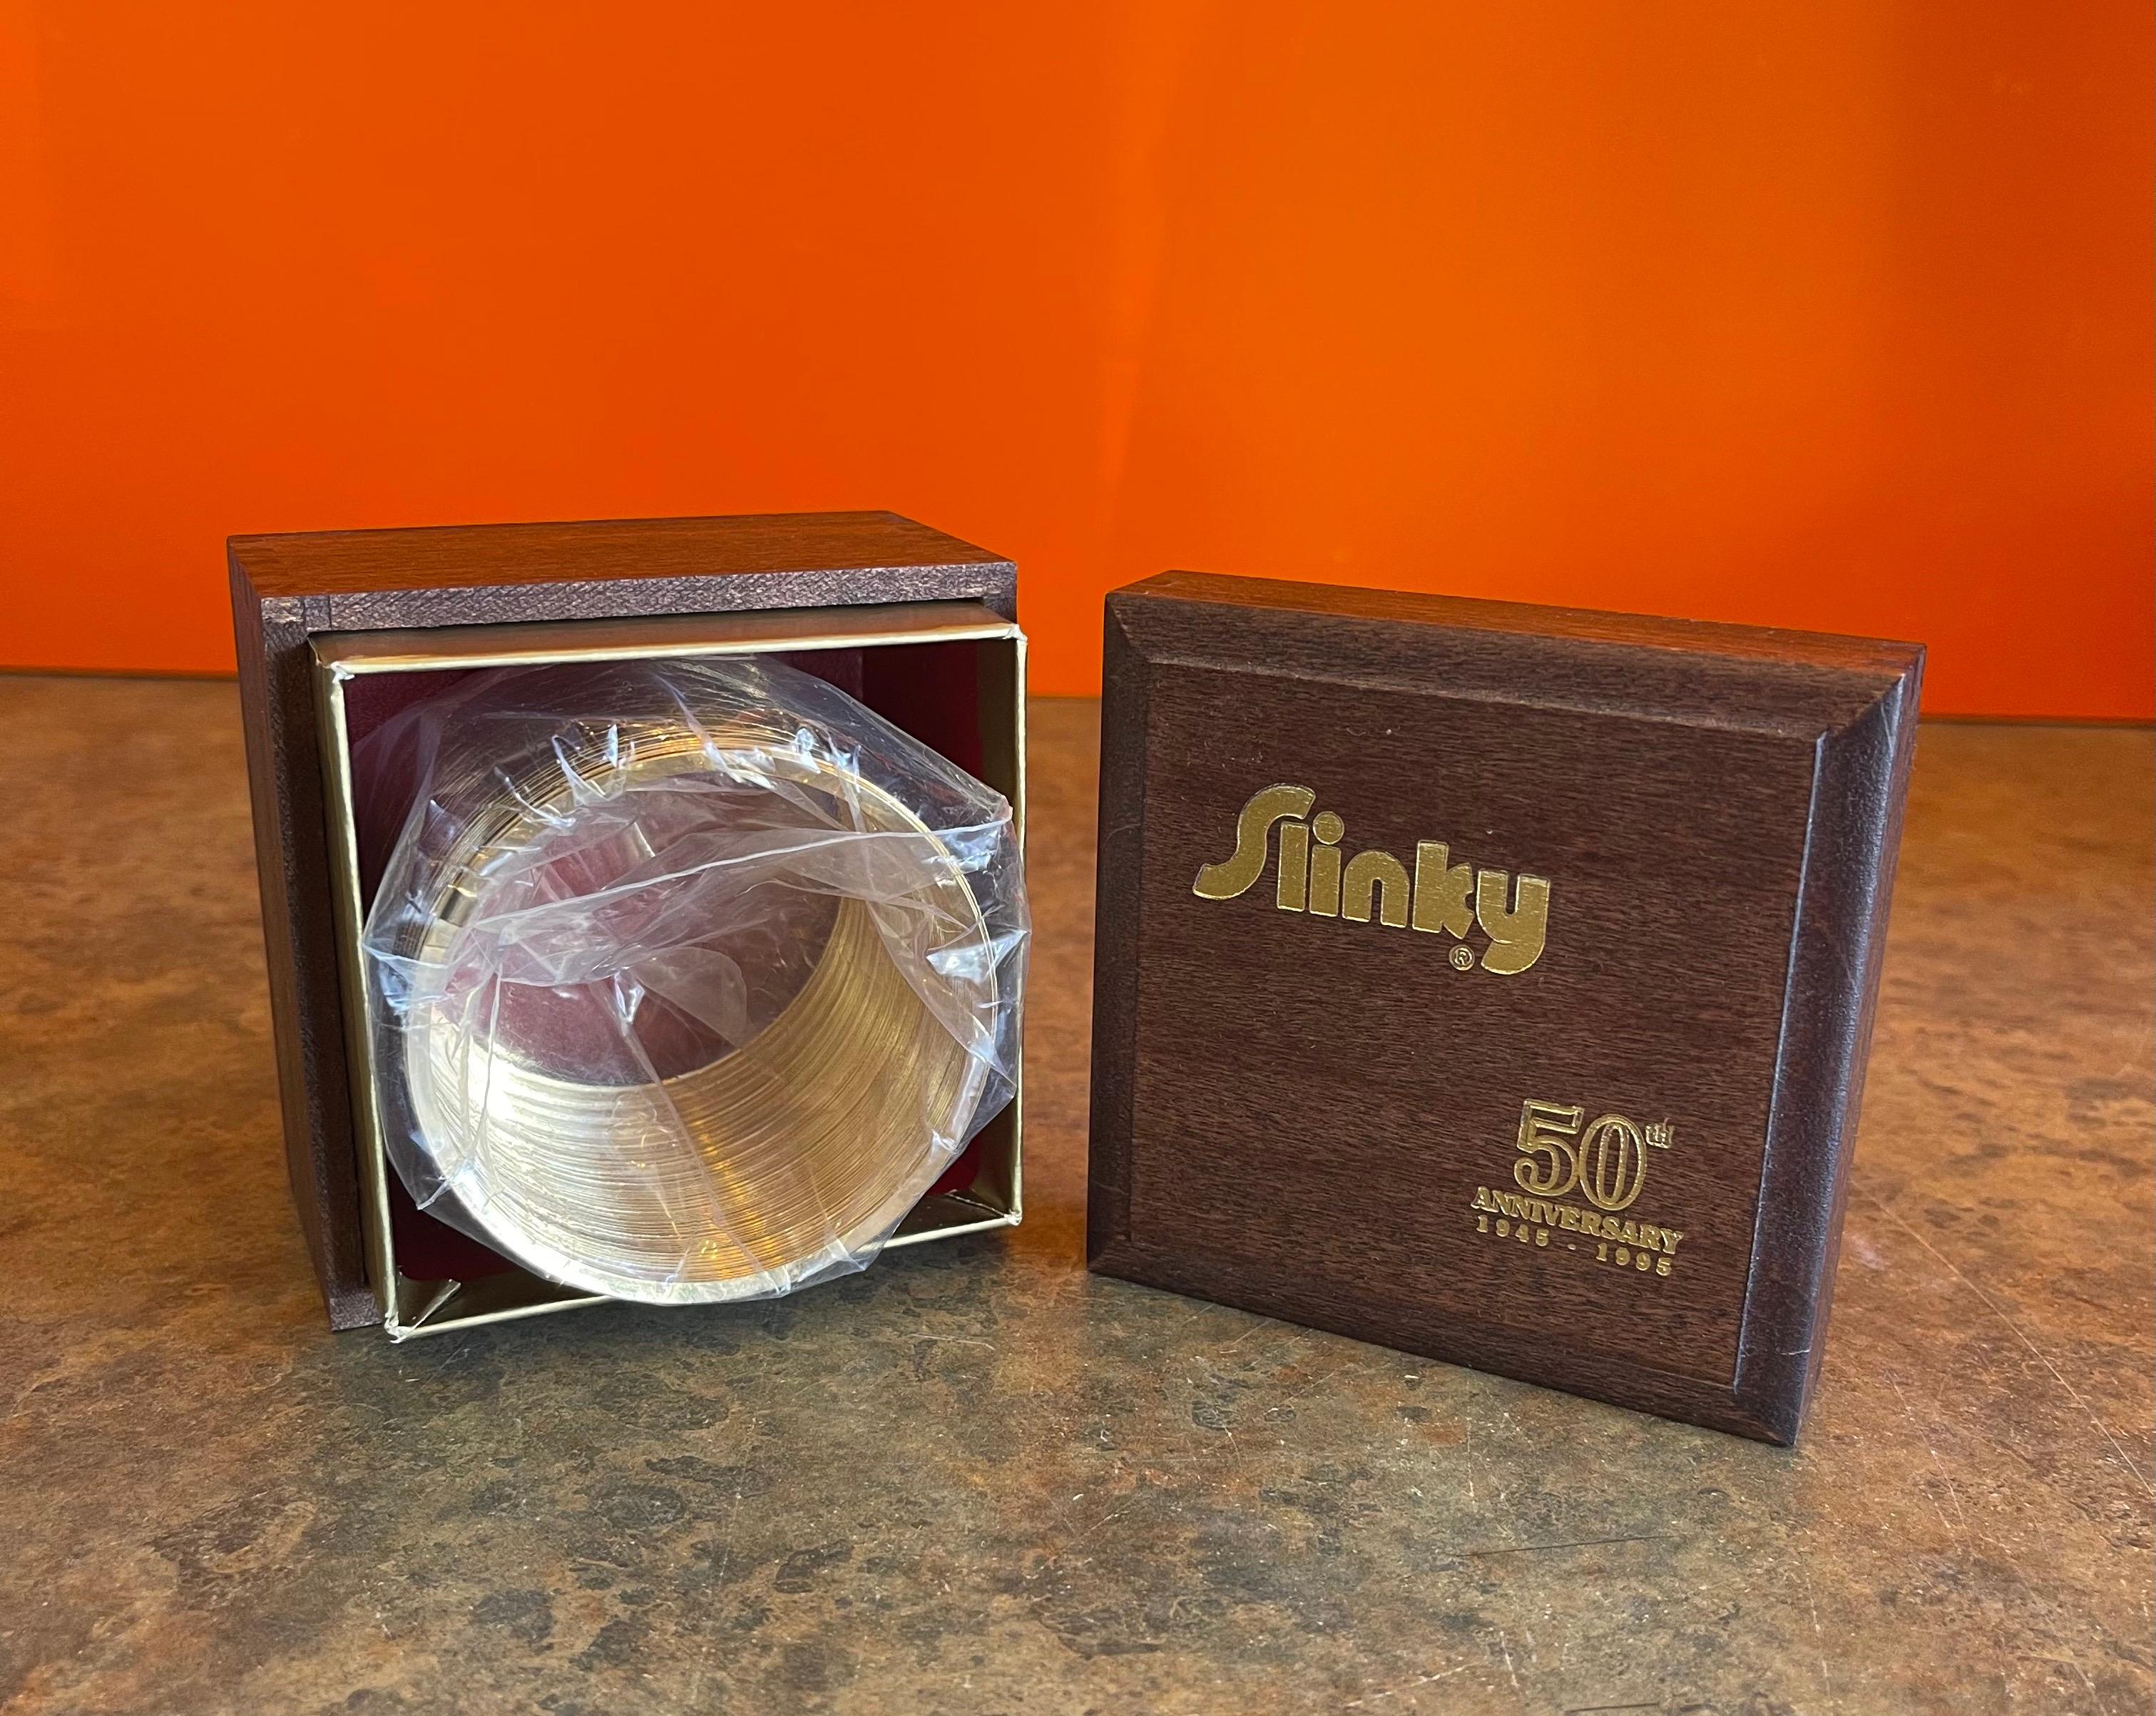 Gold Plate 50th Anniversary Gold-Plated Slinky Toy in Wood Box, New Condition